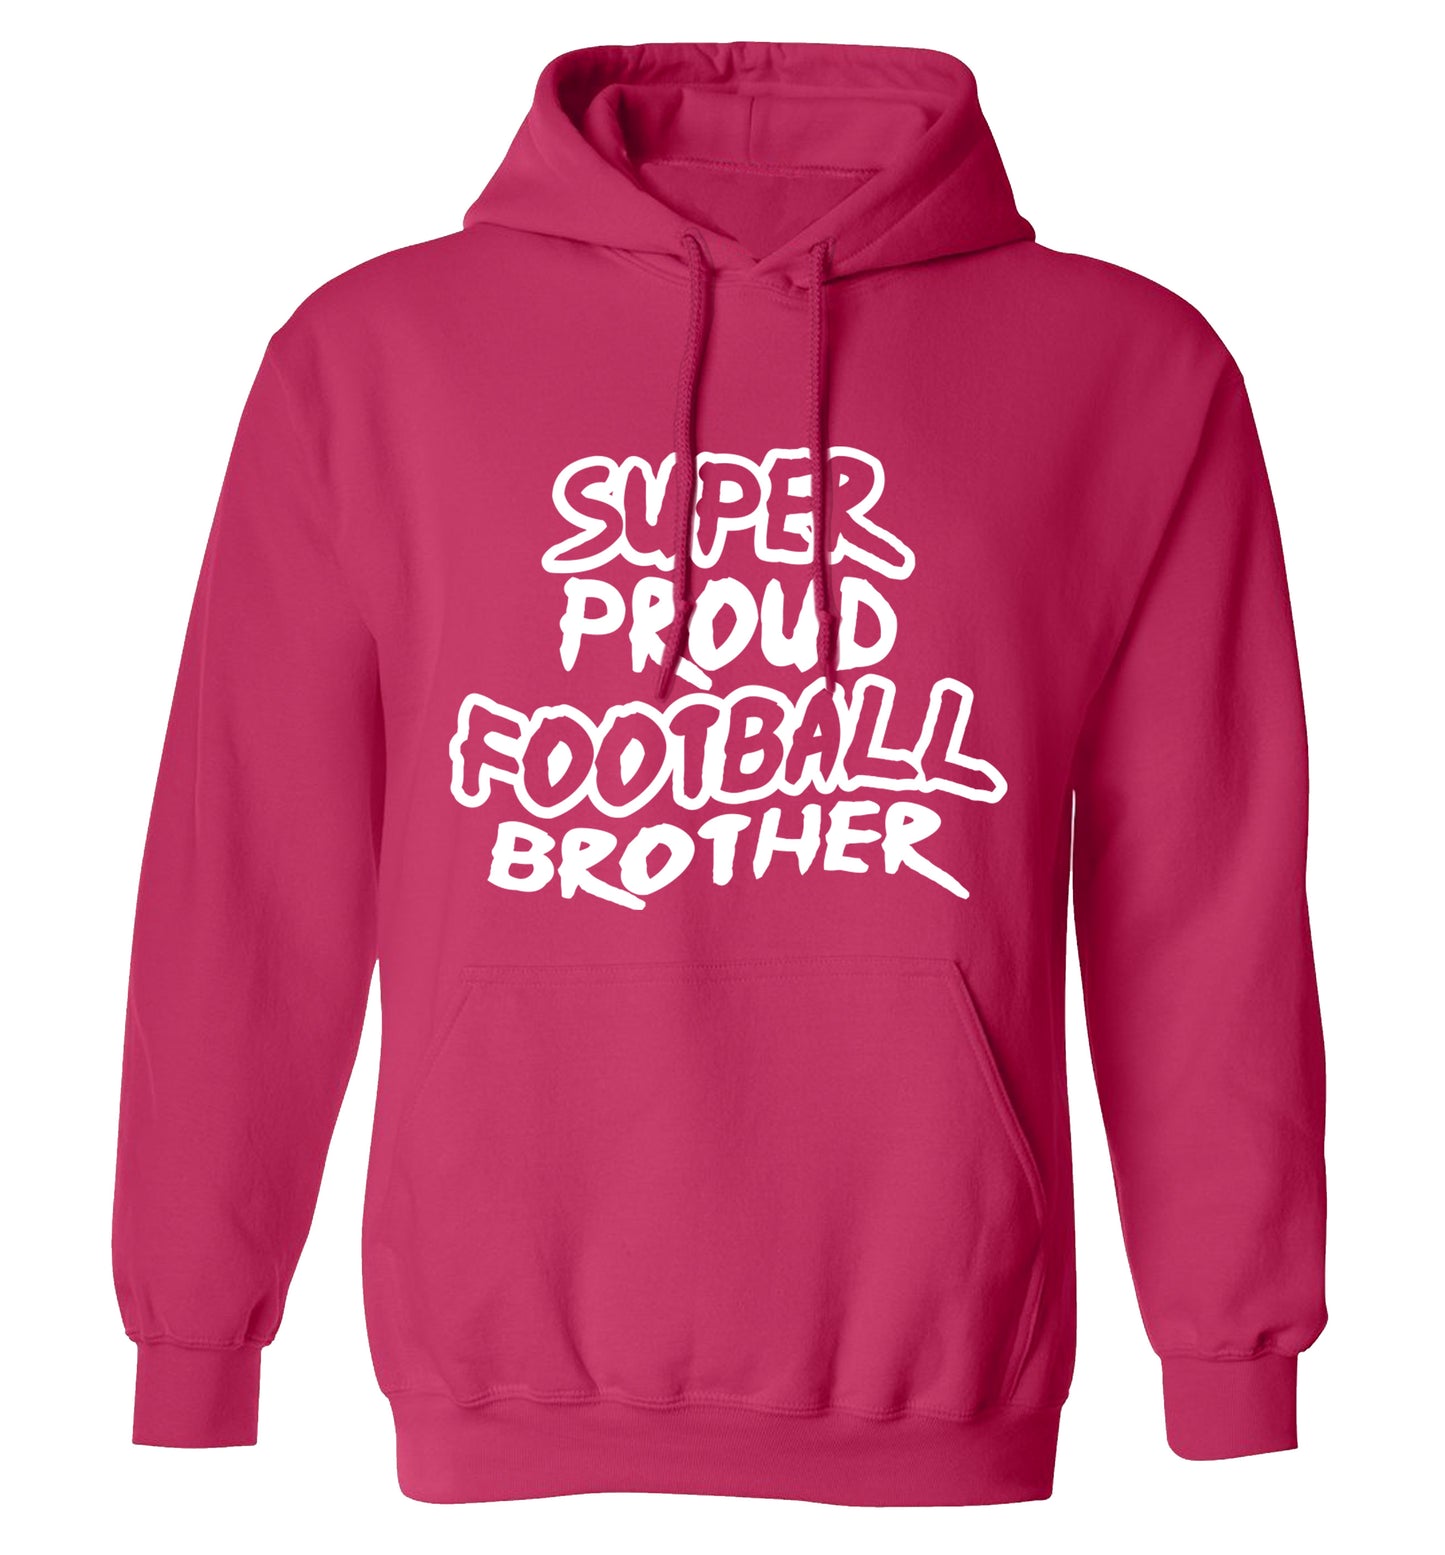 Super proud football brother adults unisexpink hoodie 2XL